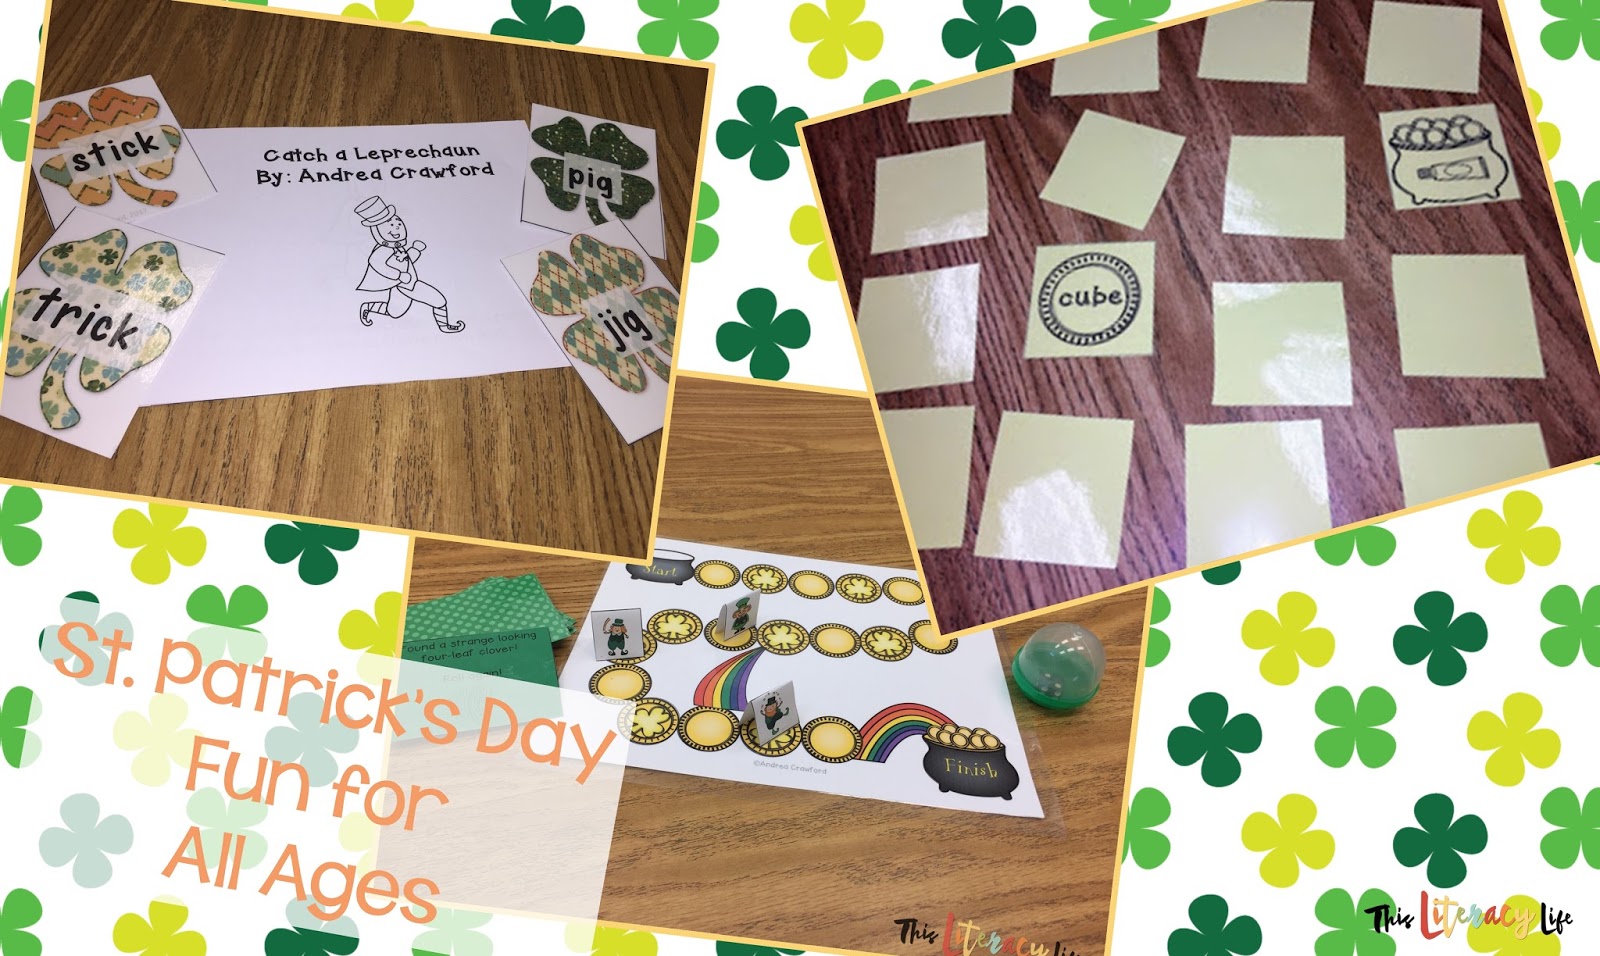 St. Patrick's Day can be fun for all ages! Use these fun and engaging literacy games, books, and activities to get your students smiling with the leprechauns!